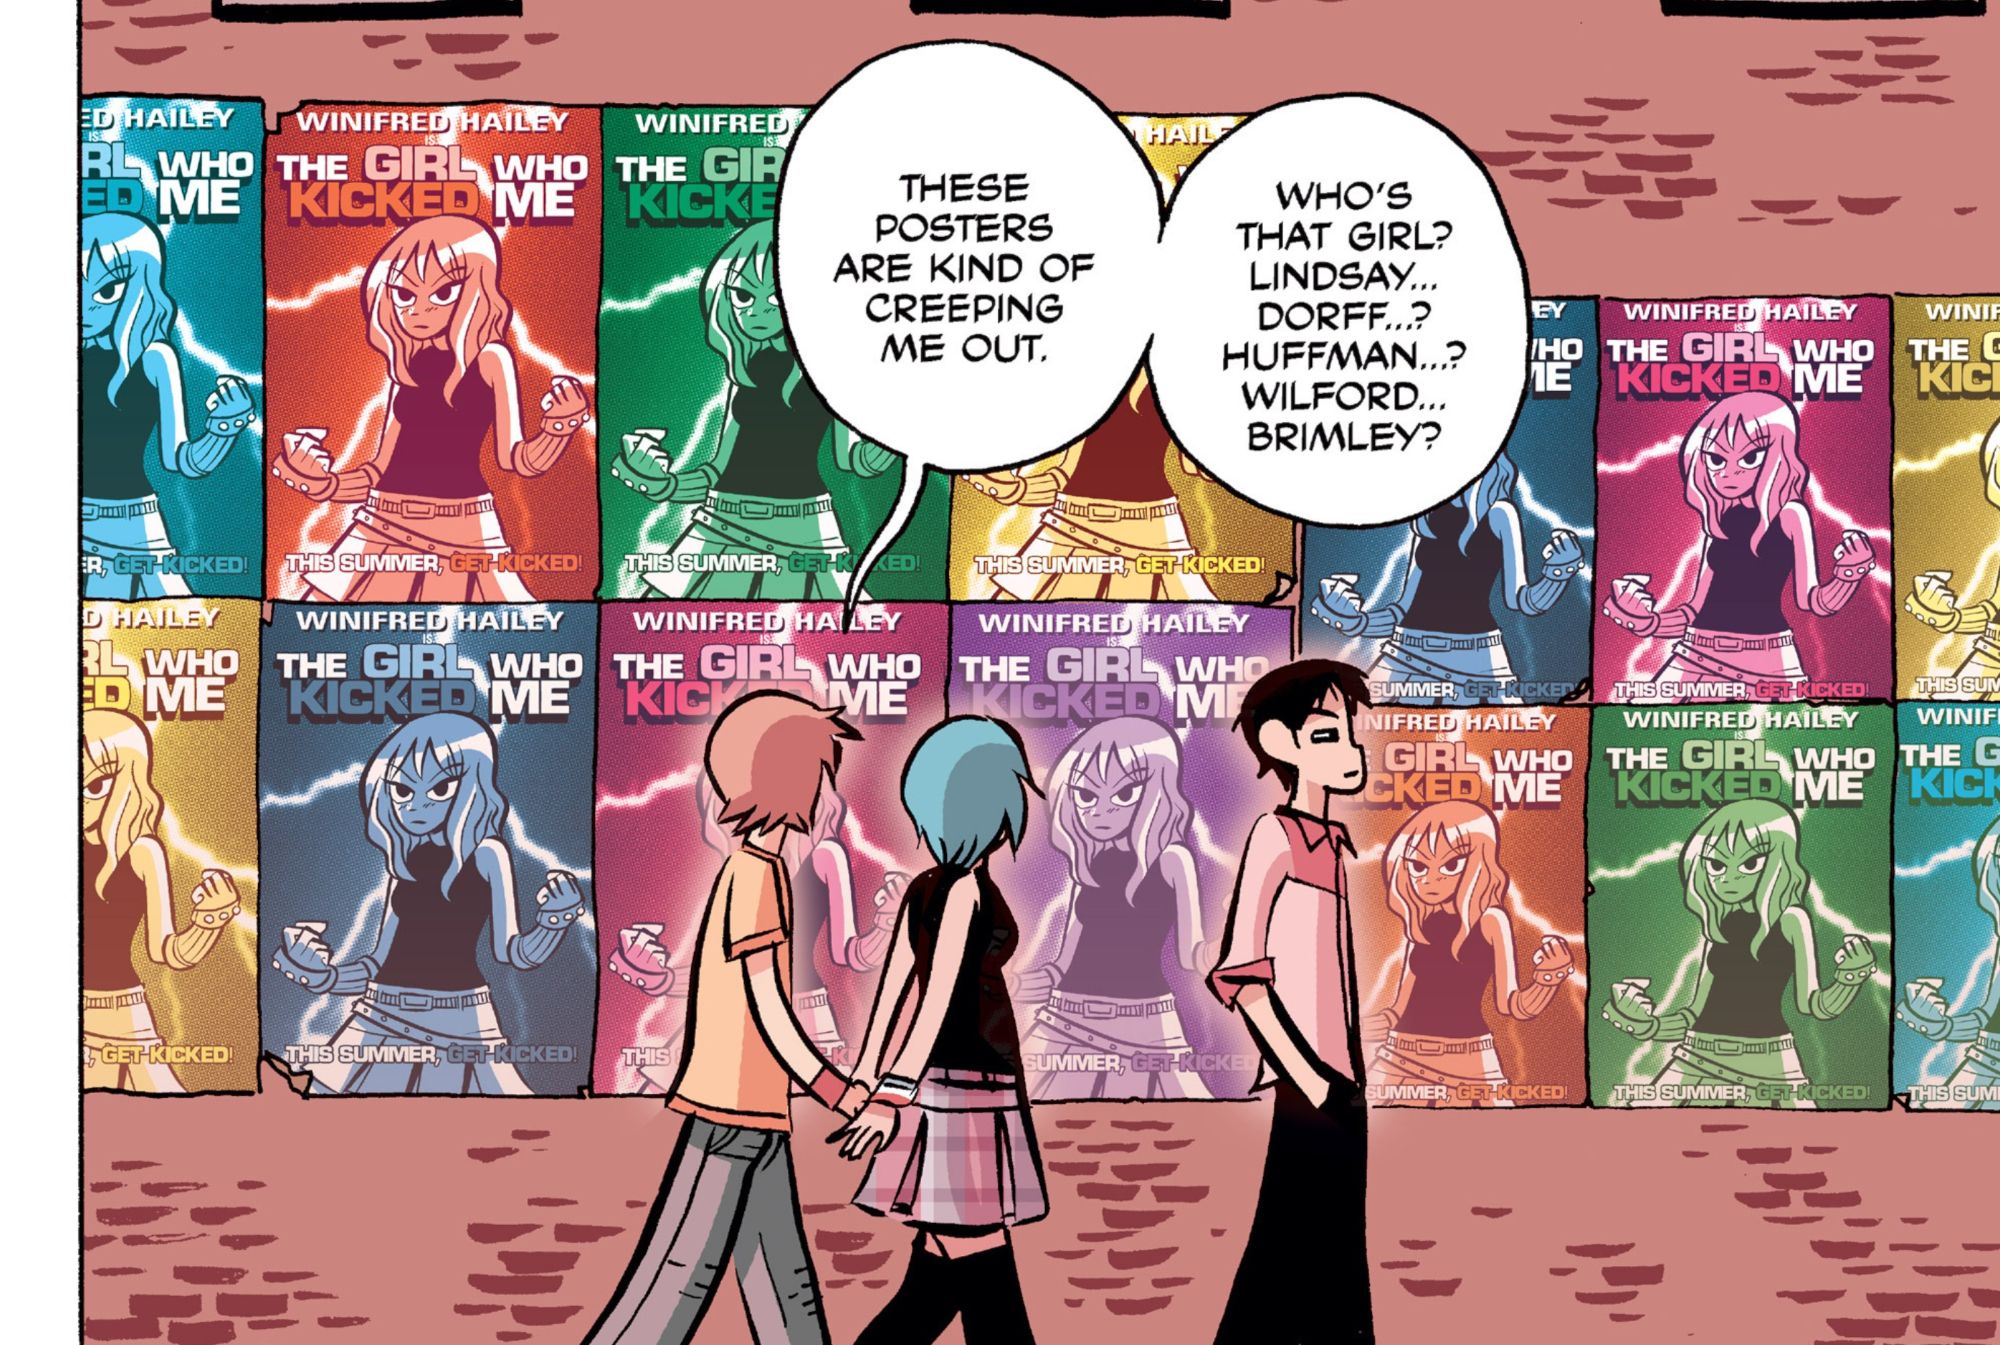 Comic panel from Free Scott Pilgrim side story shows Wallace, Scott, and Ramona walking by a brick wall covered in movie posters of the teen film star Winifred Hailey.